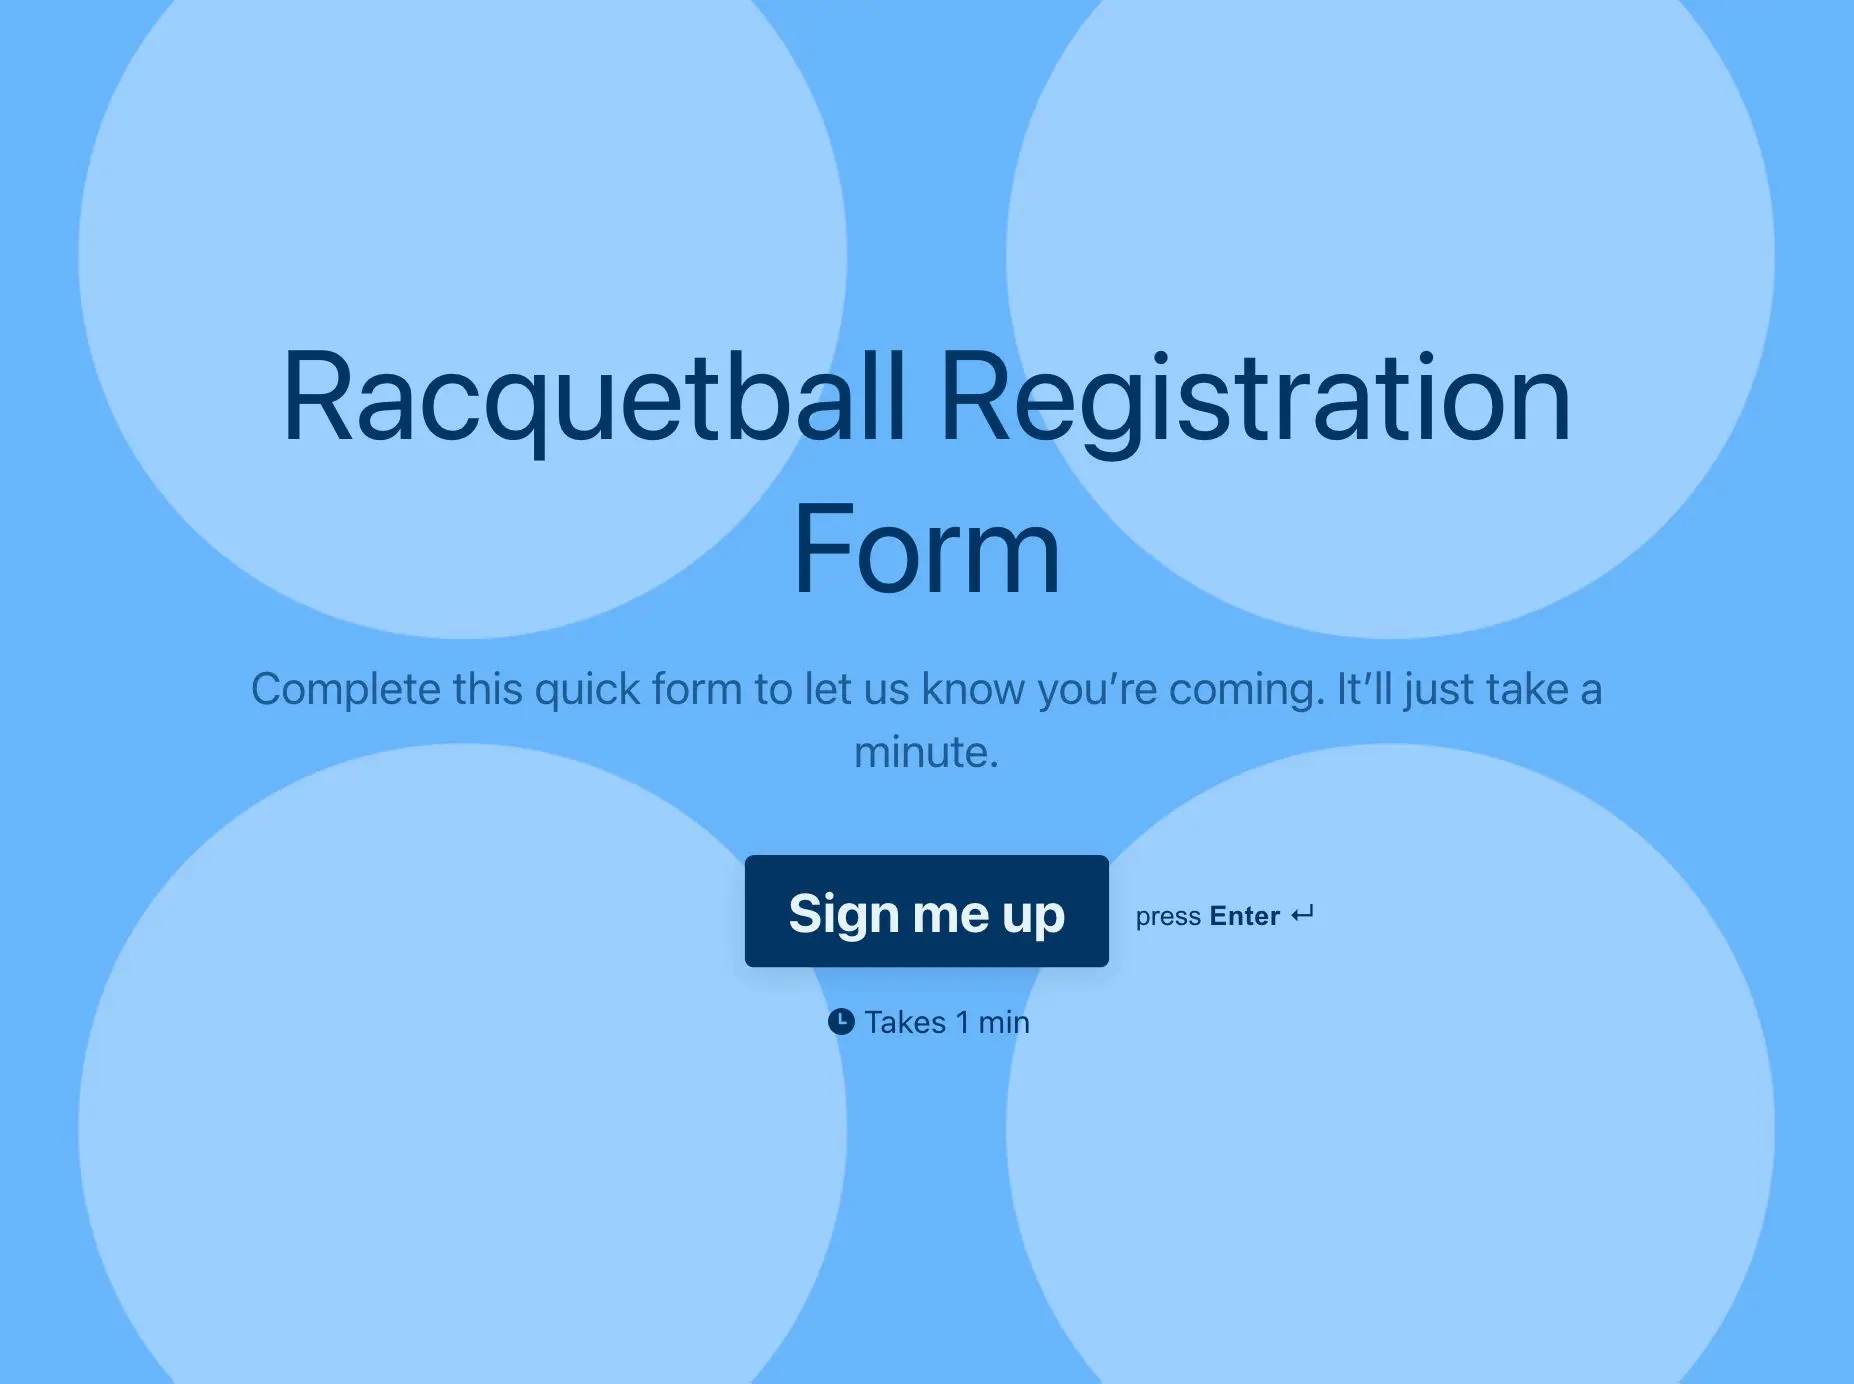 Racquetball Registration Form Template Hero